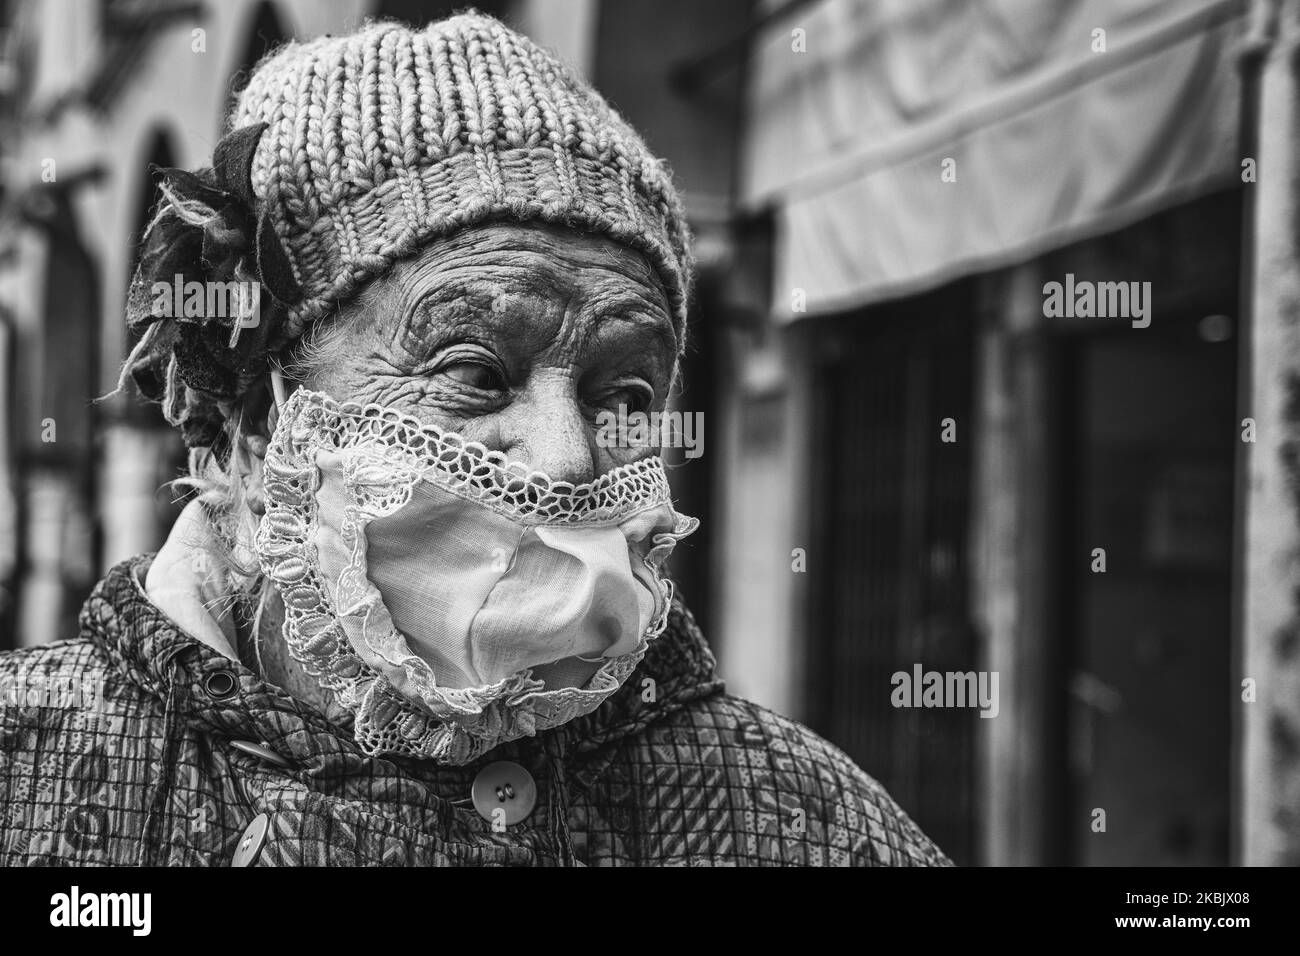 (EDITOR'S NOTE: Image was converted to black and white) An elderly lady, who went to the market in Piazza delle Erbe for shopping, wears a mask made by her at home to protect herself from the probable infection with COVID-19 (Coronavirus)., Padua, Italy, 12th March 2020 (Photo by Roberto Silvino/NurPhoto) Stock Photo